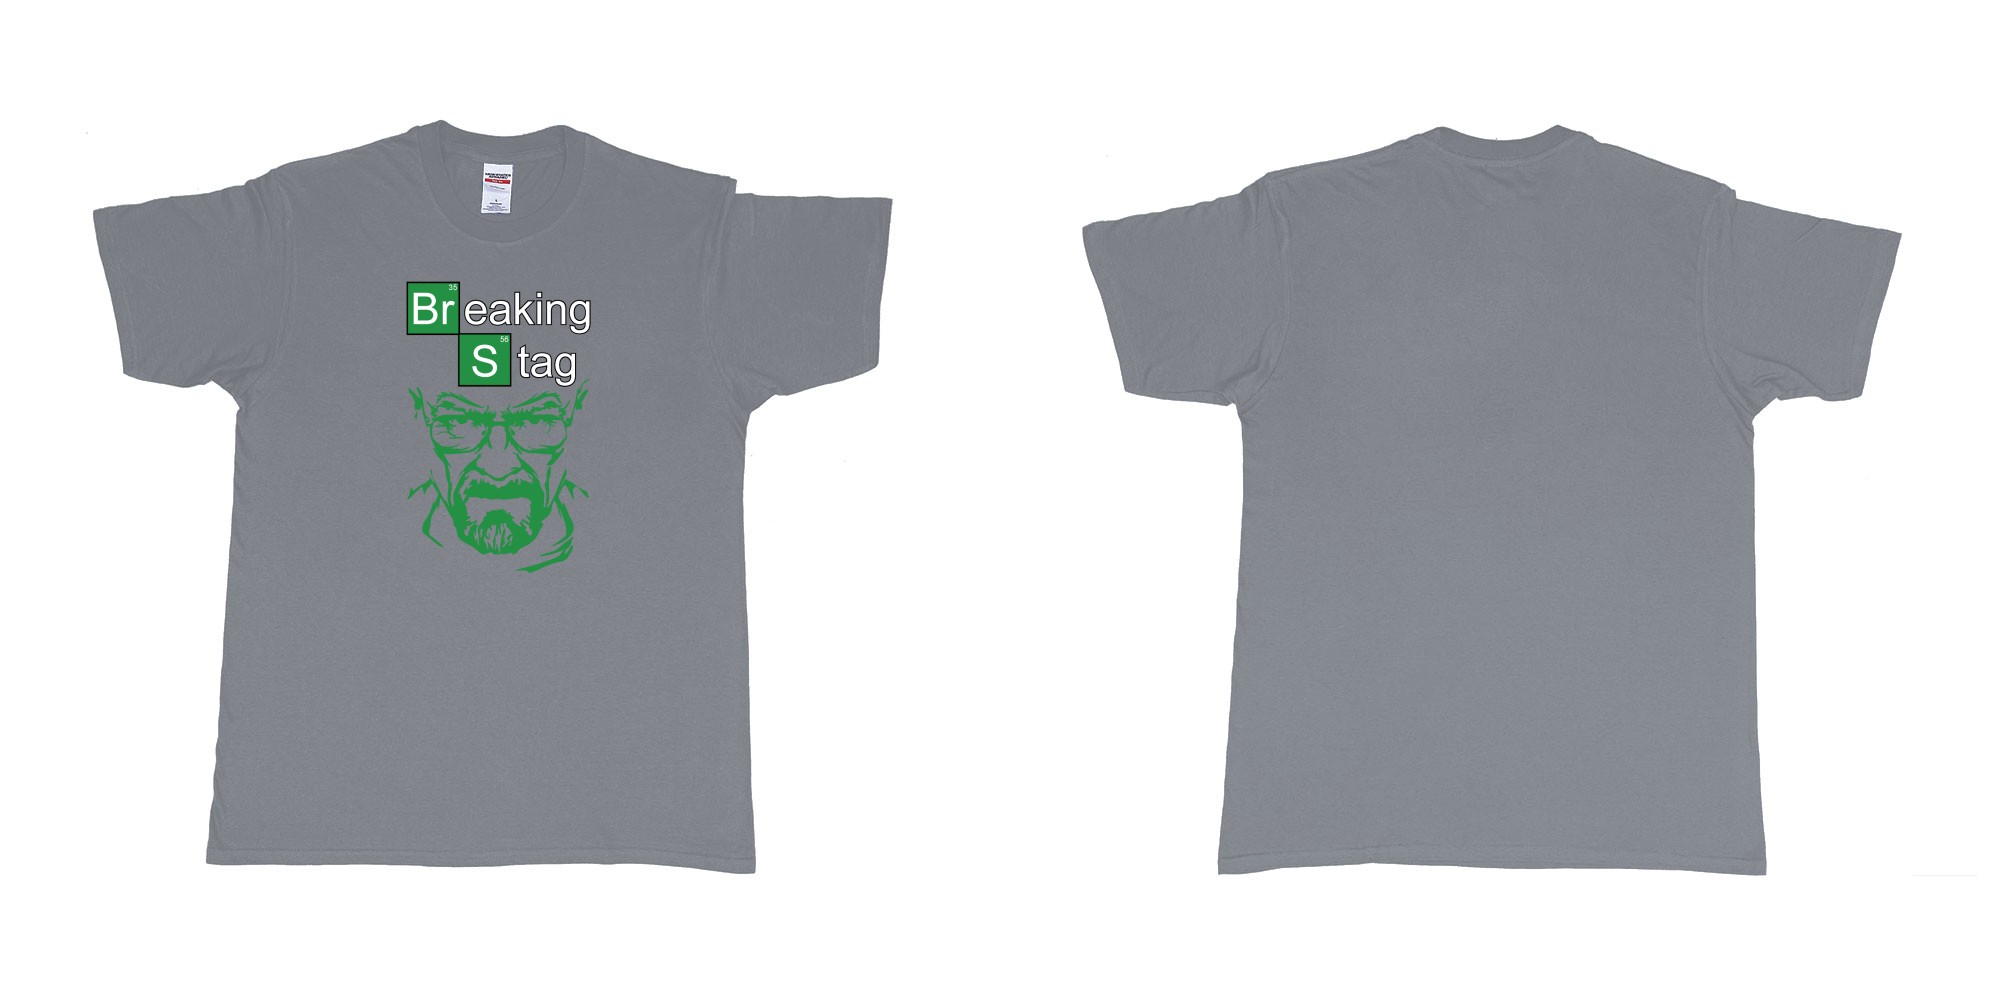 Custom tshirt design TPW Braking Bad Stag in fabric color misty choice your own text made in Bali by The Pirate Way